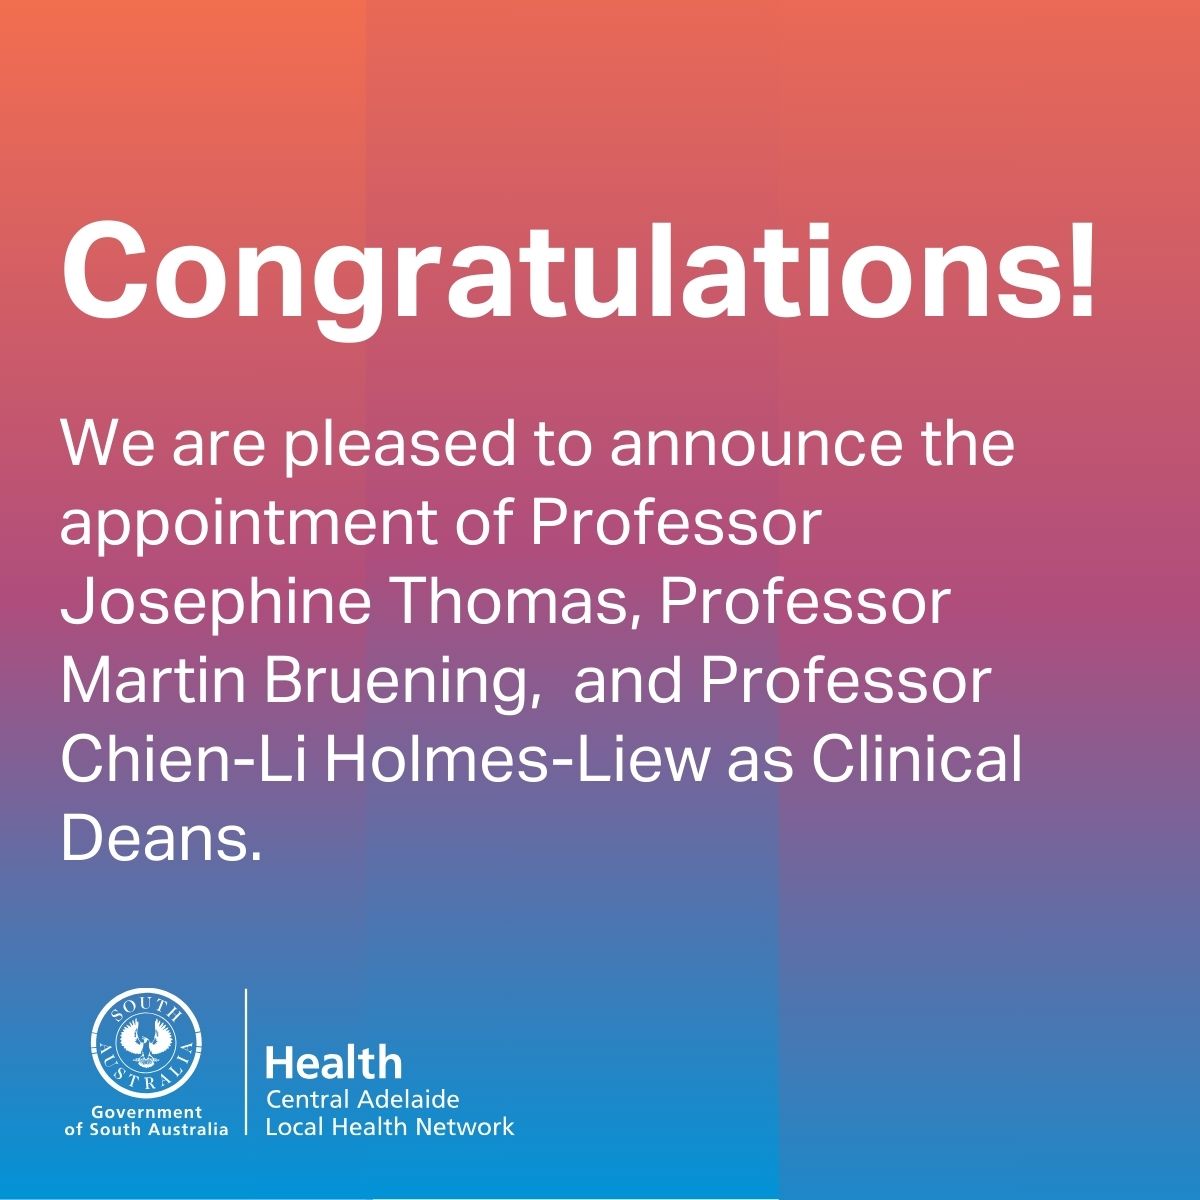 Congratulations to Prof. Josephine Thomas, Prof. Martin Bruening, and Prof. Chien-Li Holmes-Liew on their appointment as Clinical Deans. They bring a wealth of experience and will play a crucial role in shaping medical education. #Leadership #MedicalEducation